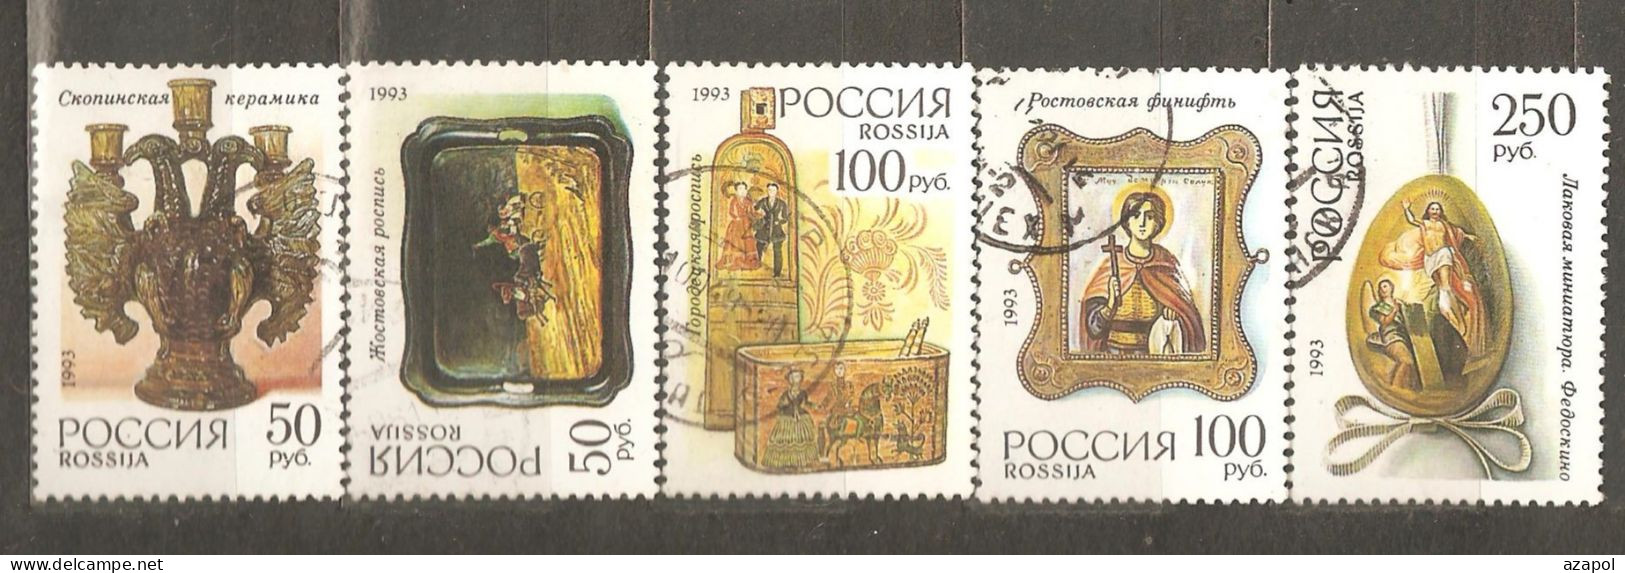 Russia: Full Set Of 5 Used Stamps,  Traditional Art - Museums, 1993, Mi#328-32 - Gebruikt